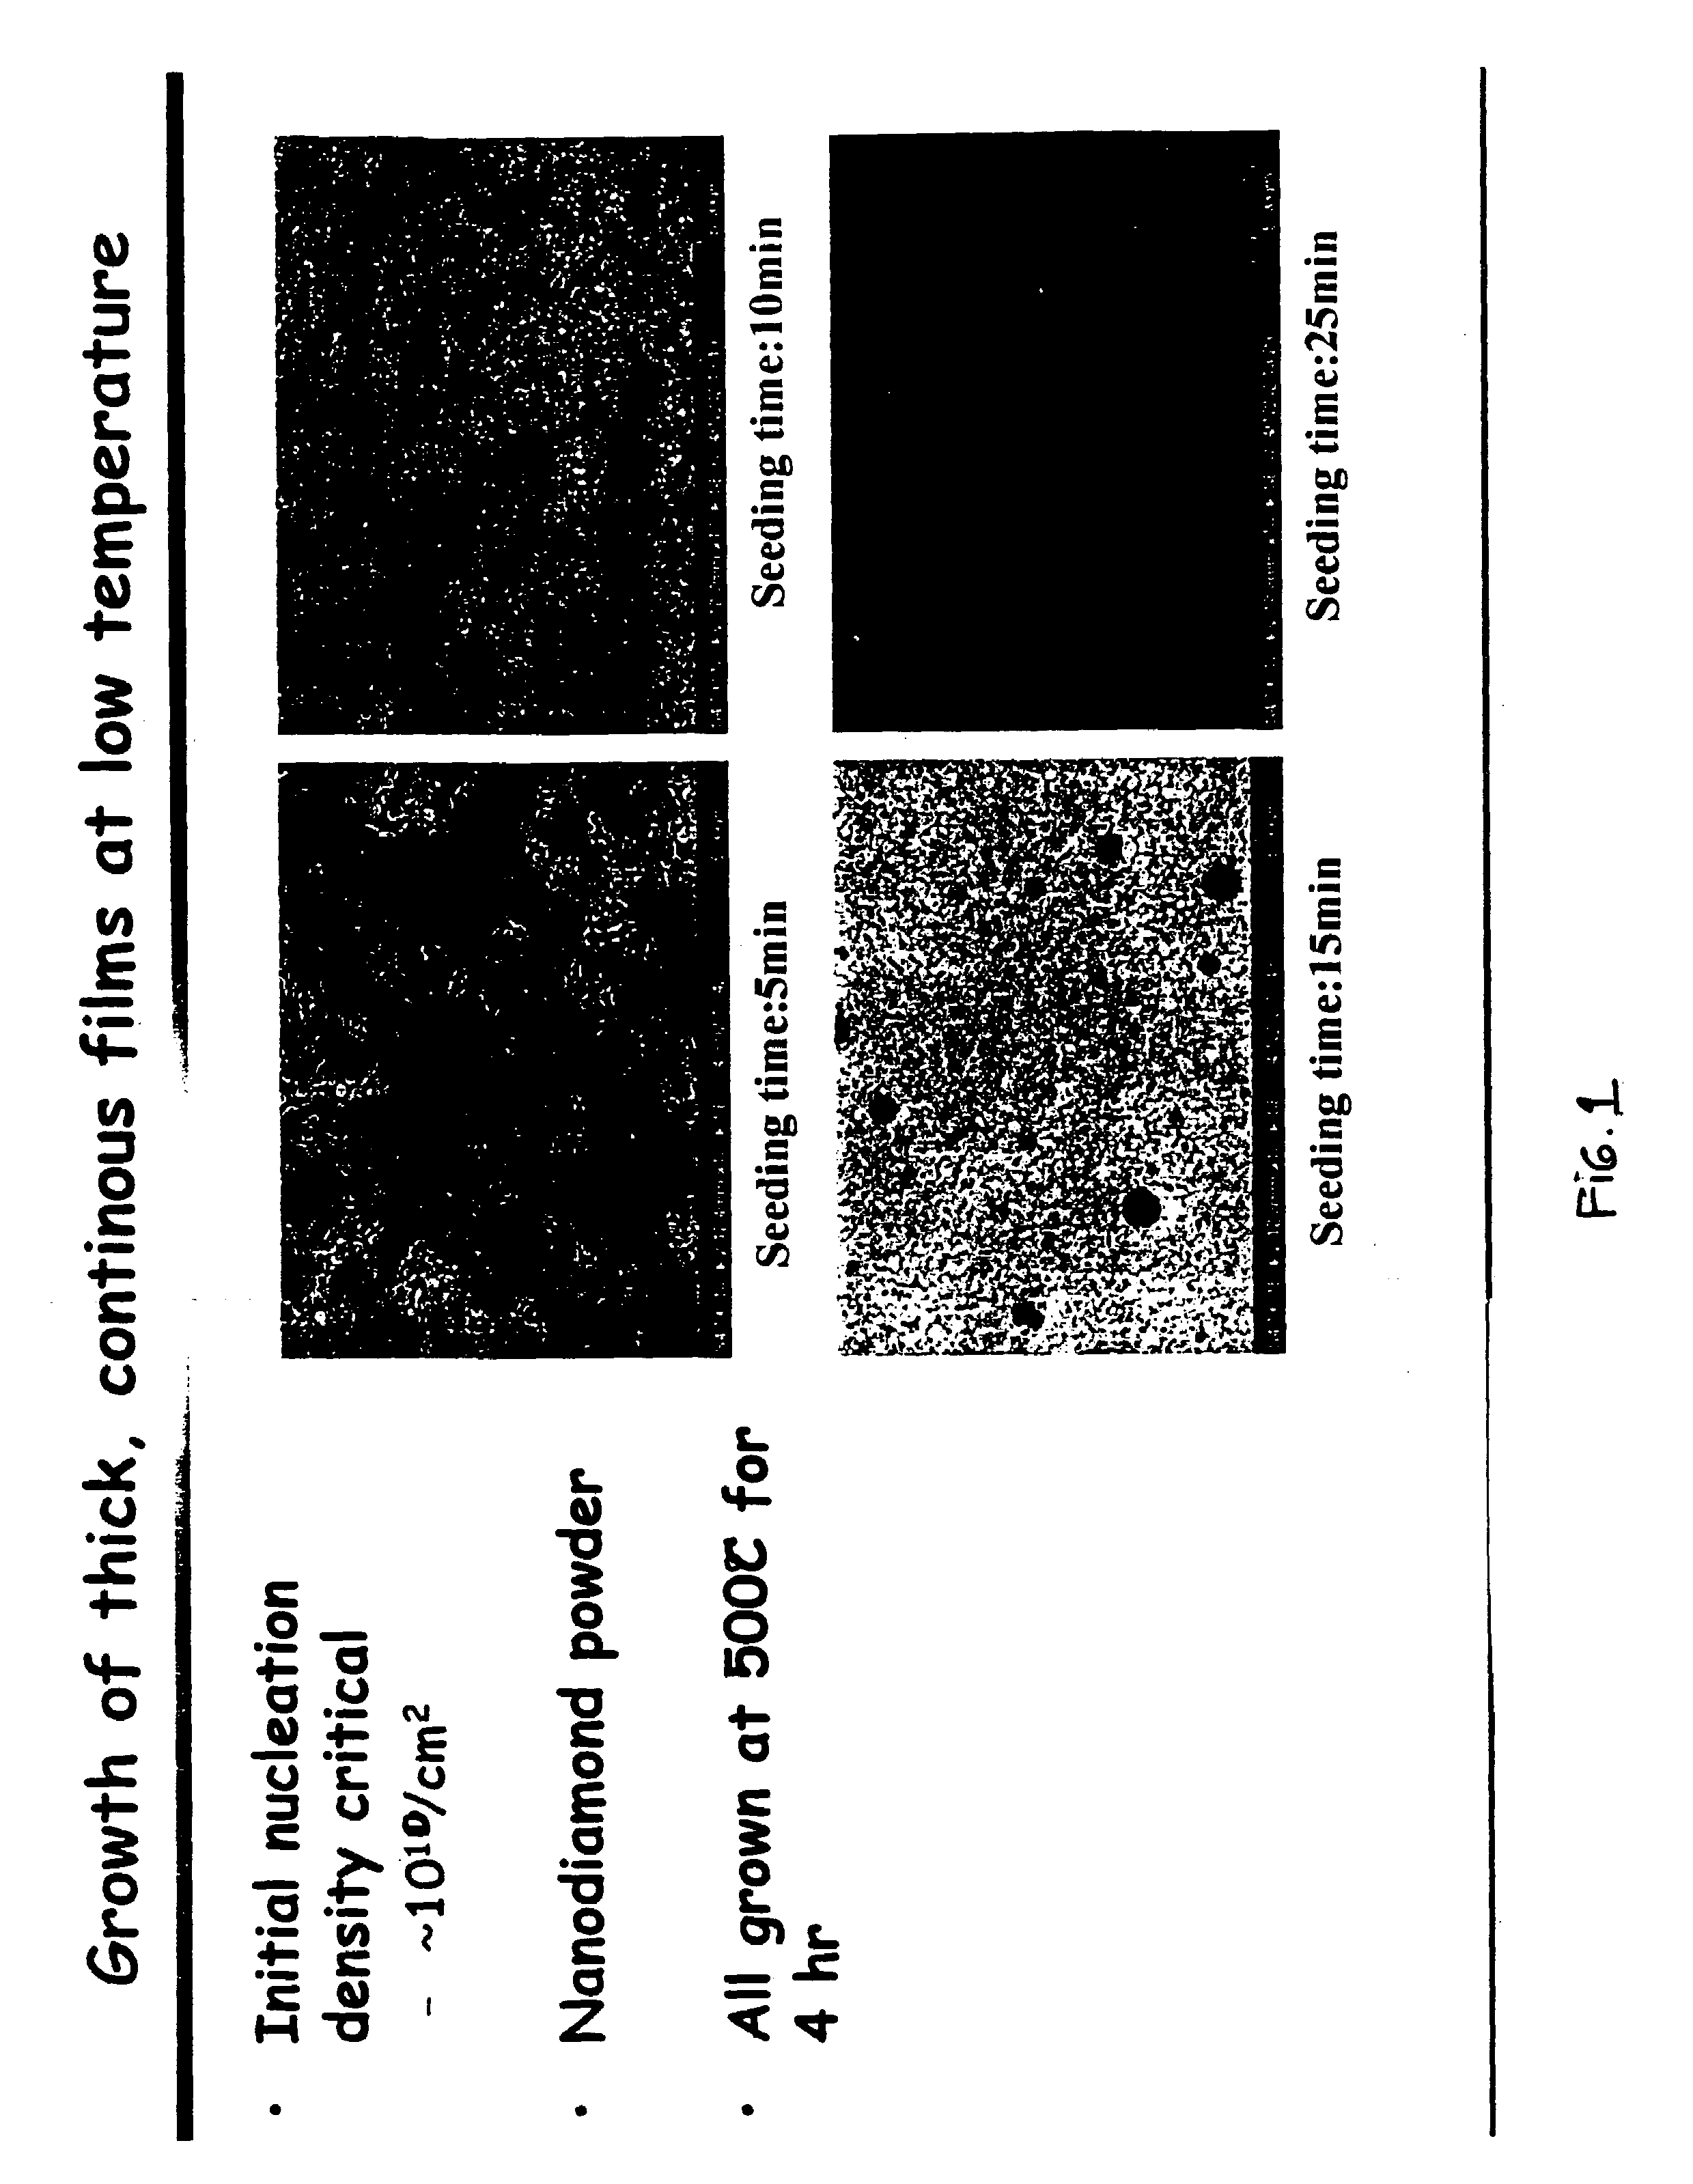 Method to grow pure nanocrystalline diamond films at low temperatures and high deposition rates